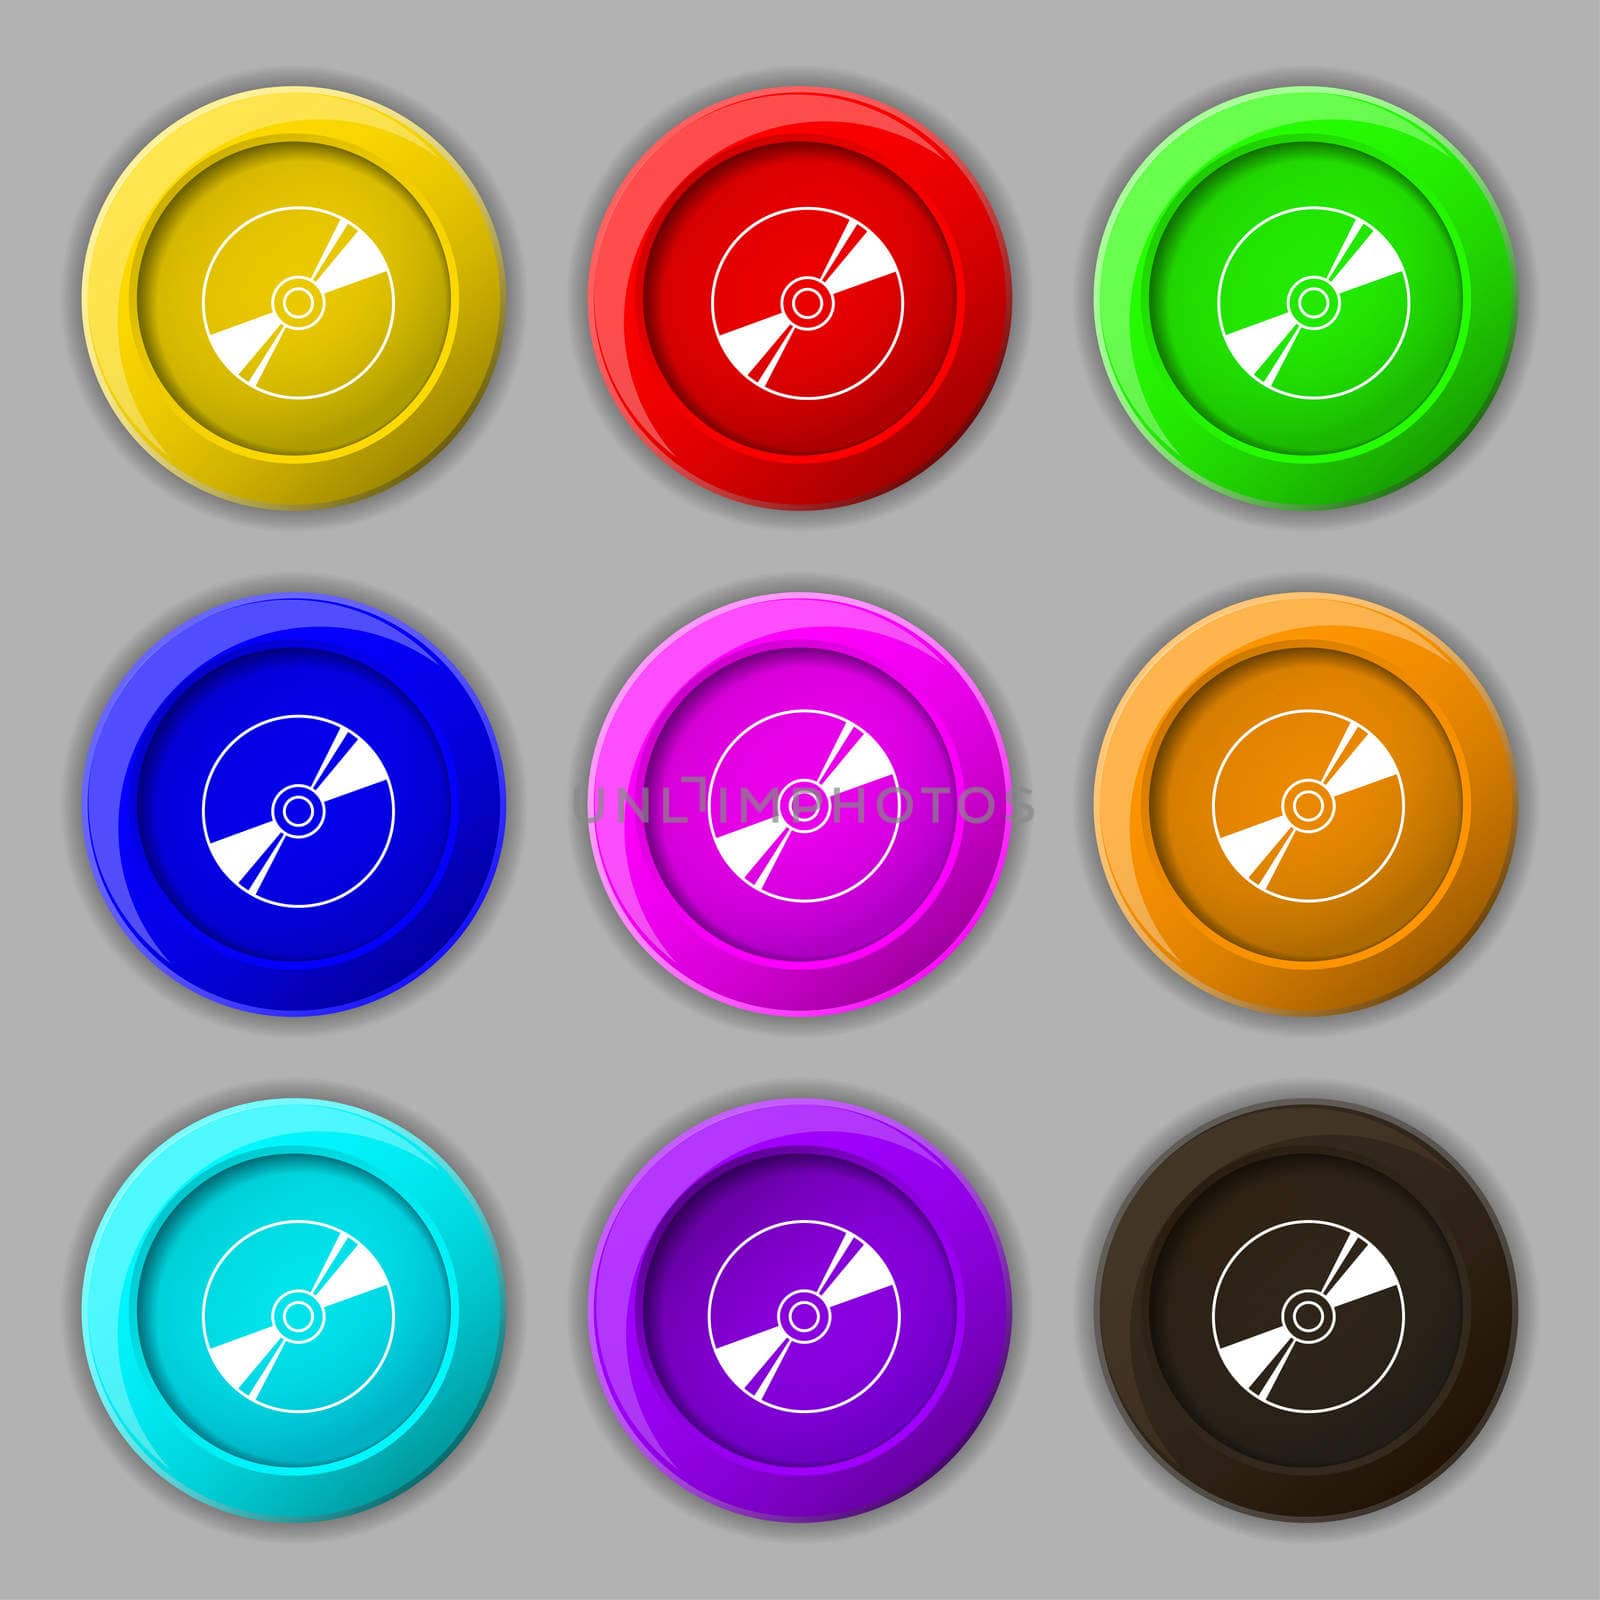 Cd, DVD, compact disk, blue ray icon sign. symbol on nine round colourful buttons. illustration